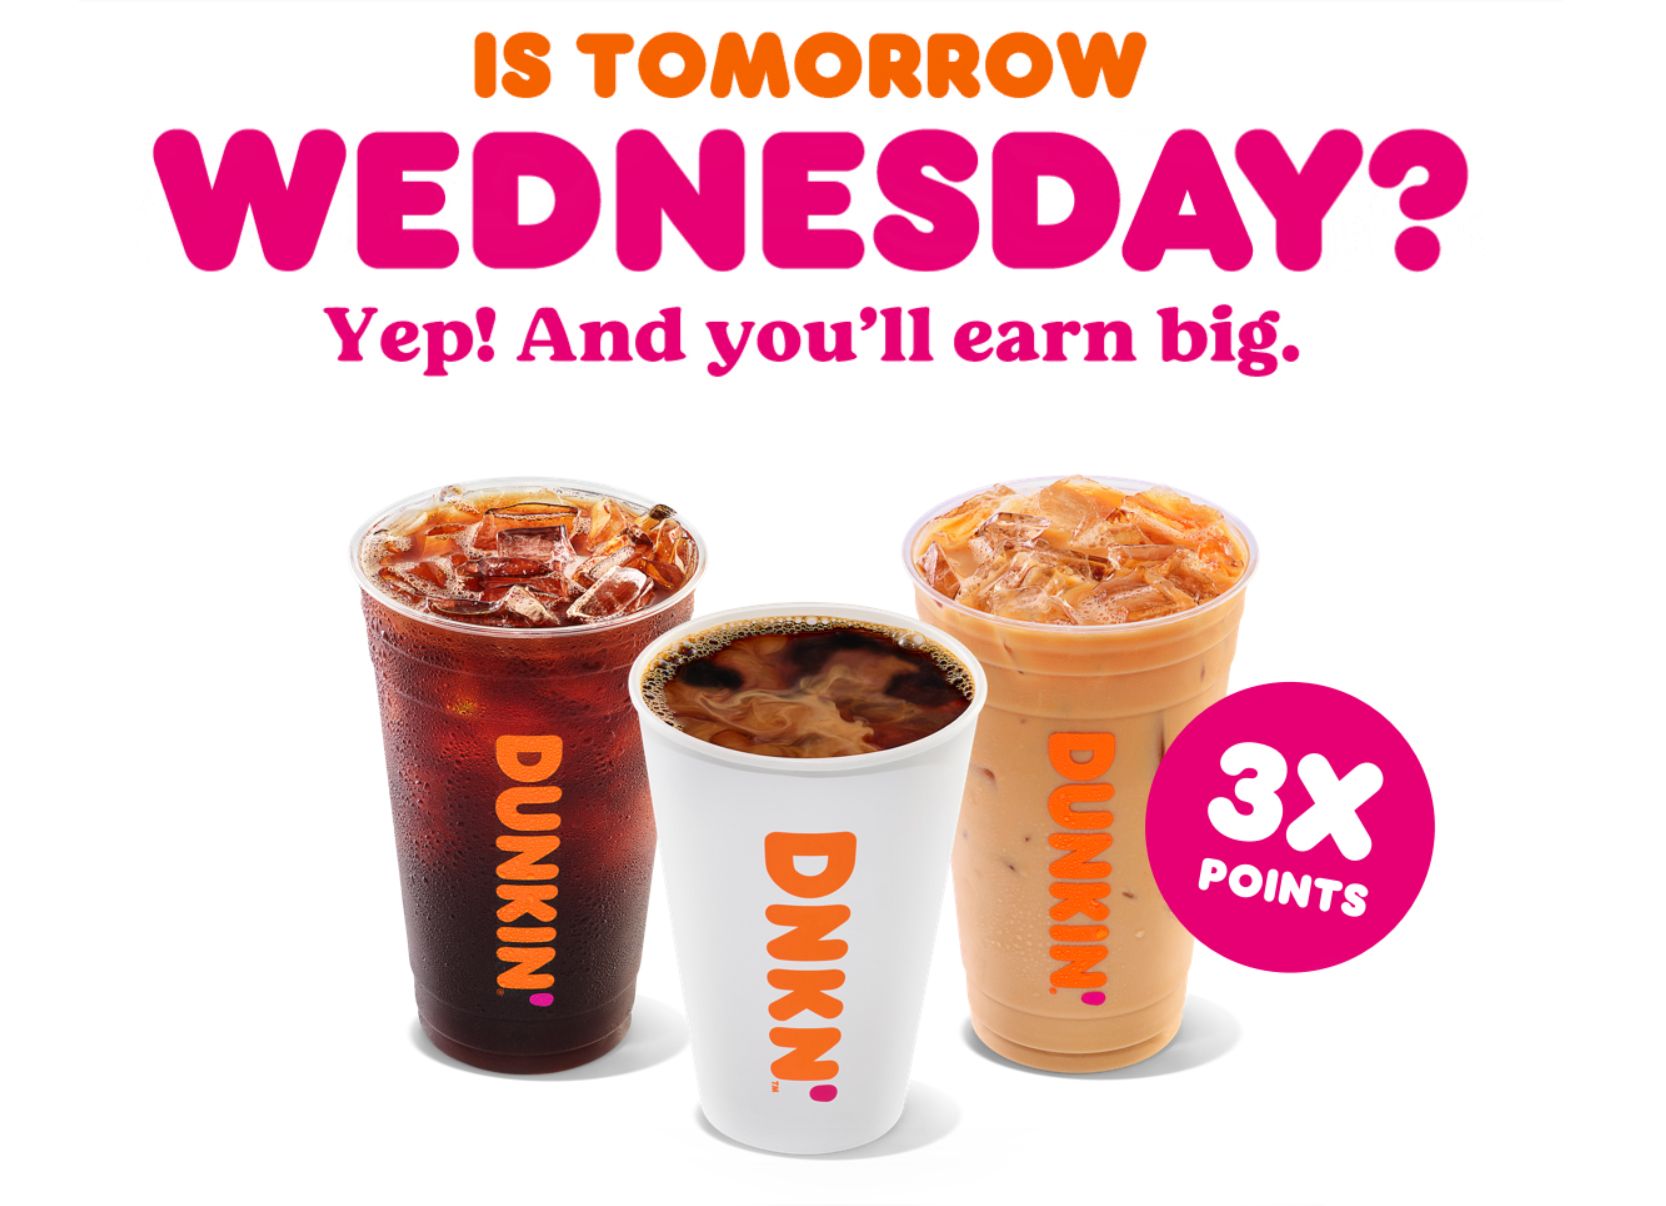 On February 17, DD Perks Members Can Earn Triple the Rewards Points on Hot or Iced Drinks at Dunkin' Donuts